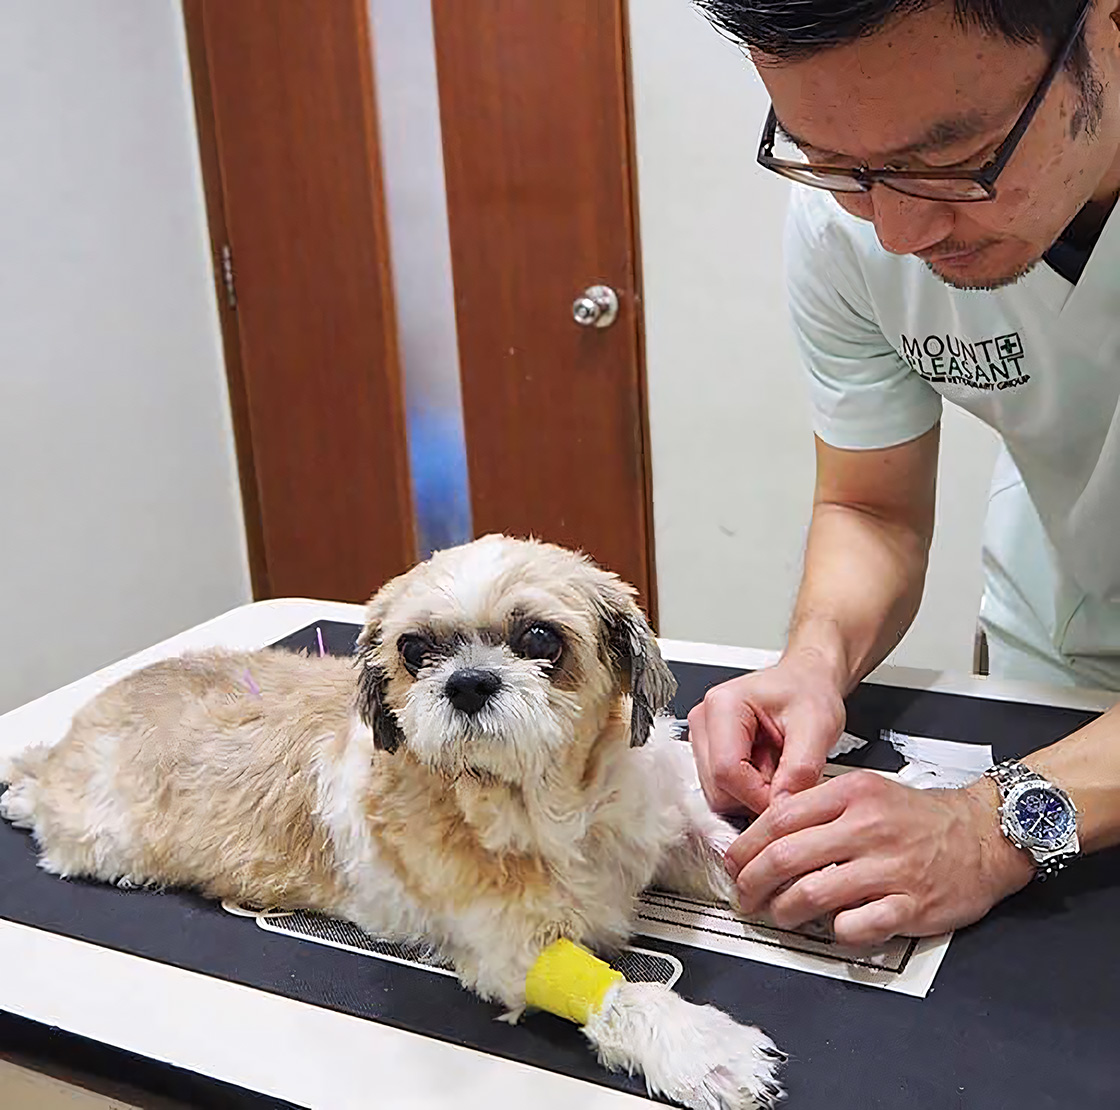 A veterinarian administers treatment to a small, fluffy dog lying on an examination table.